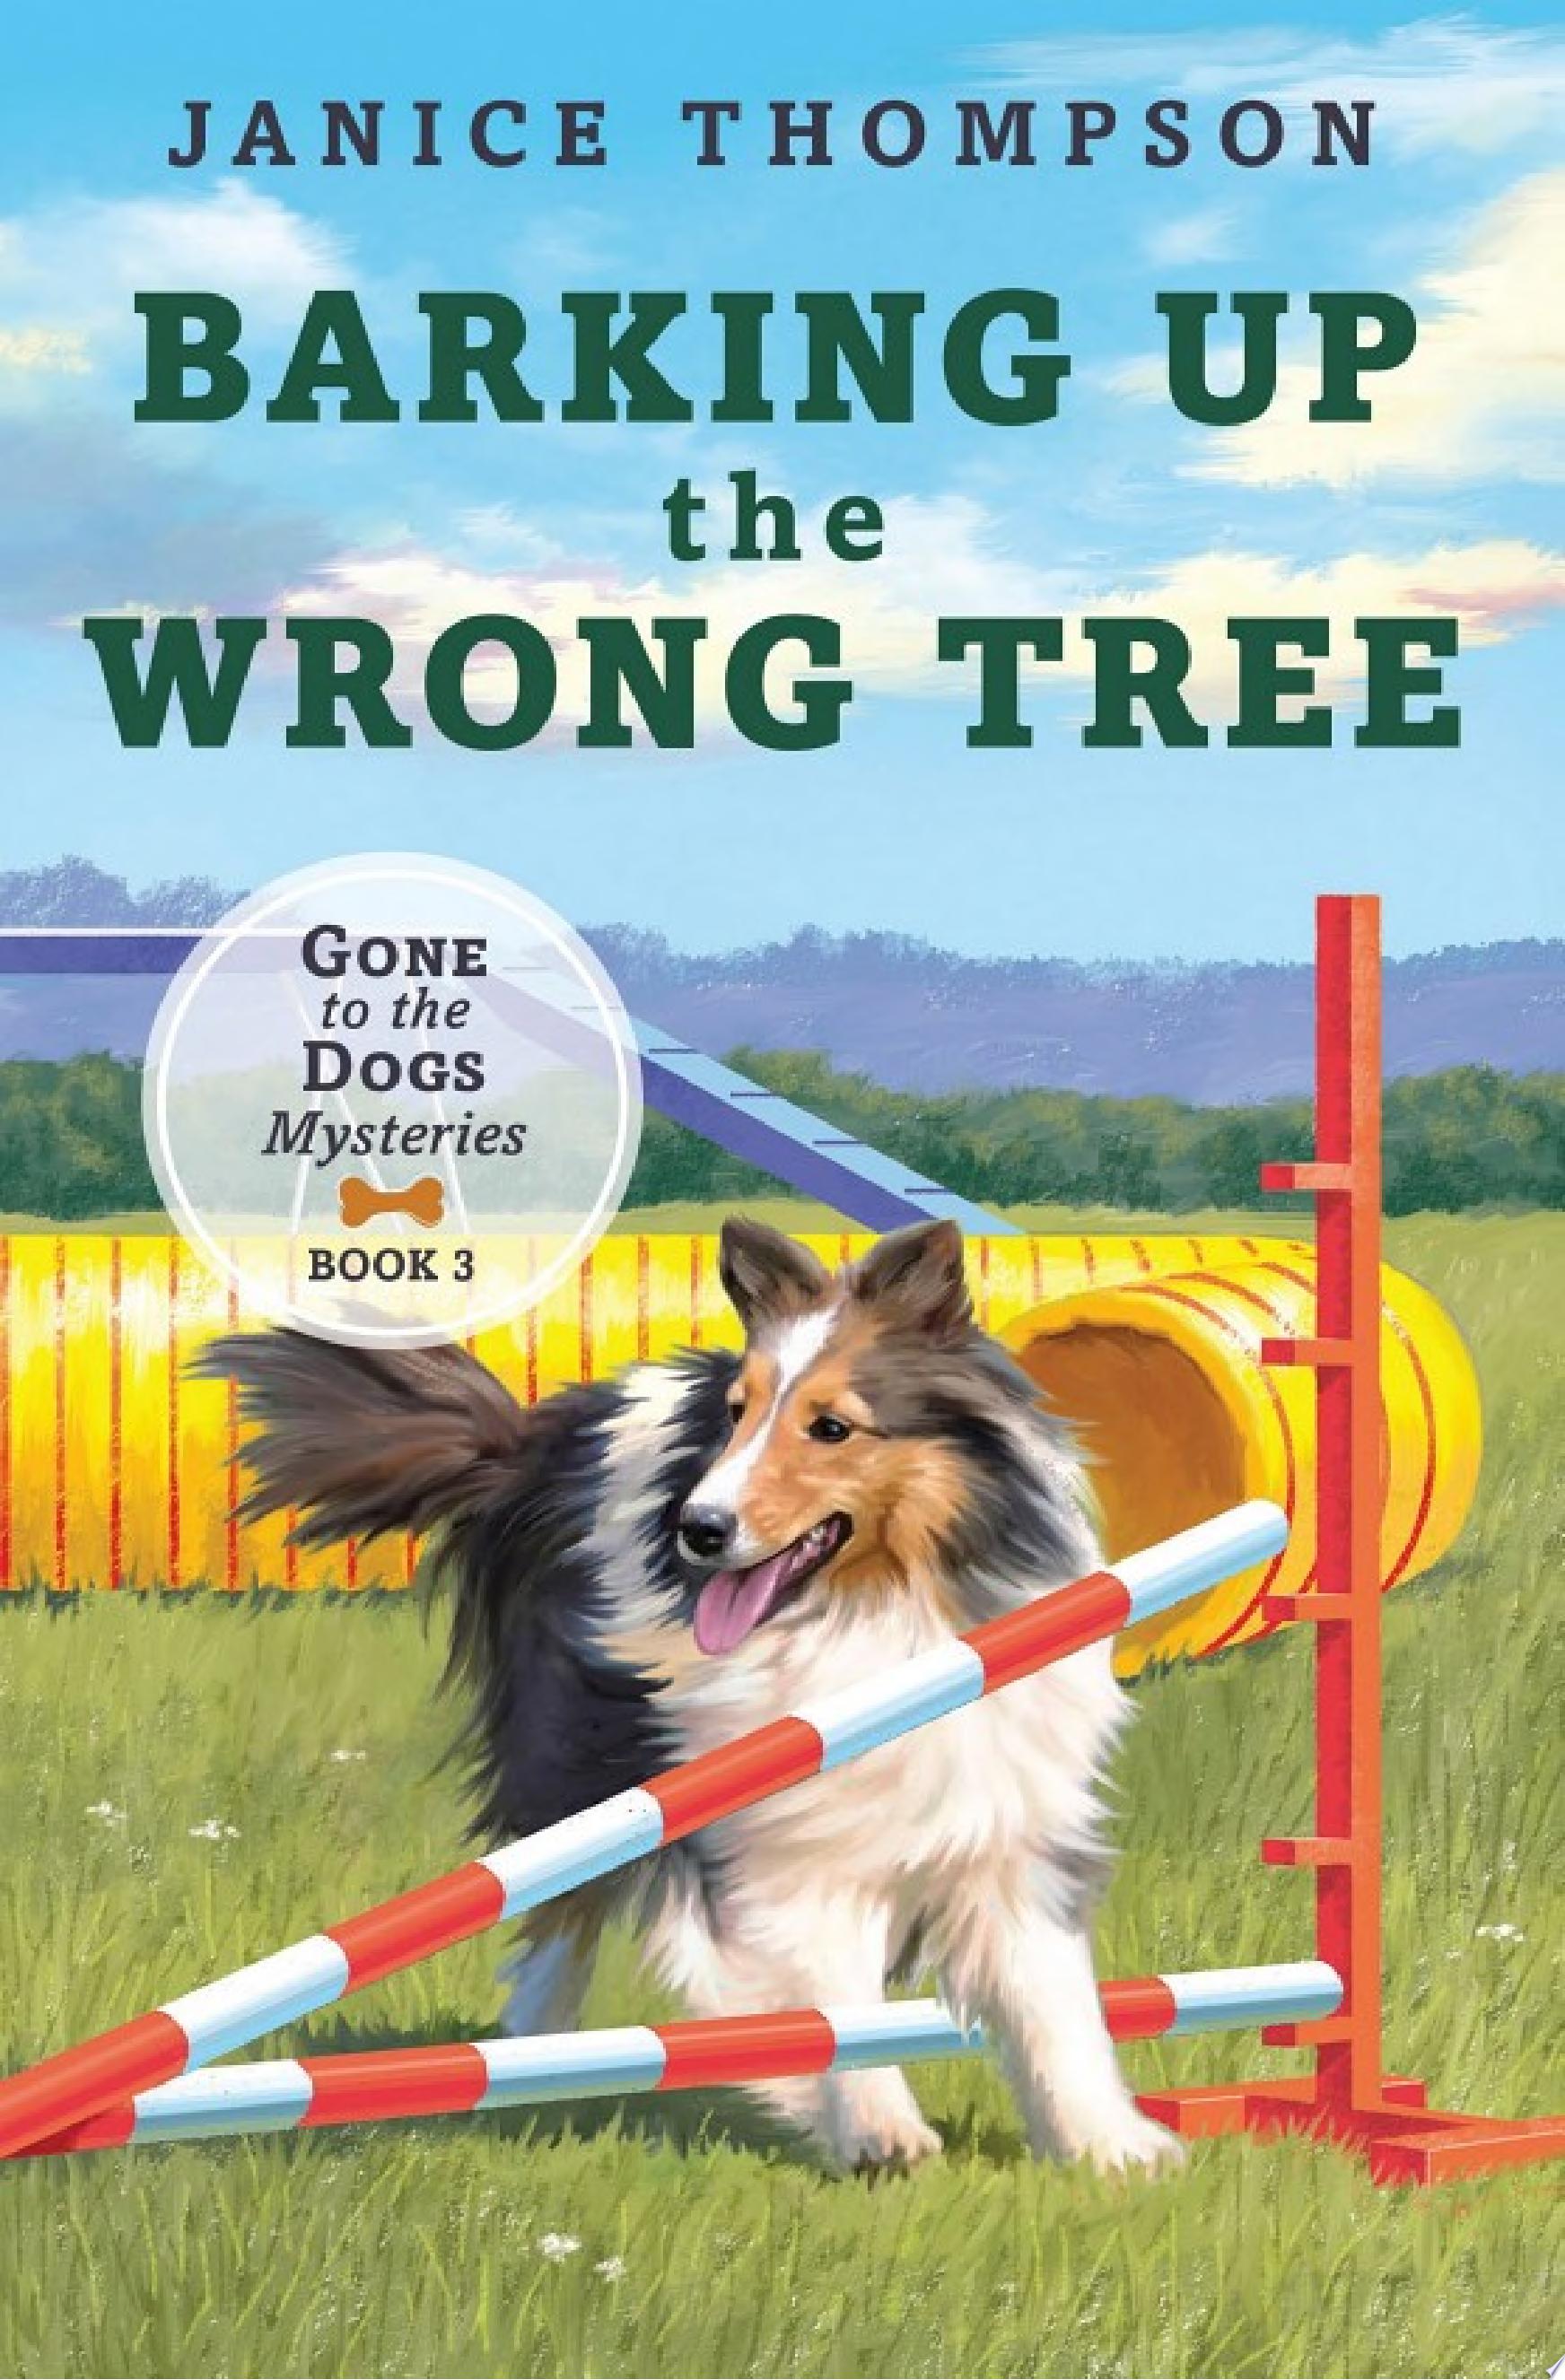 Image for "Barking up the Wrong Tree"